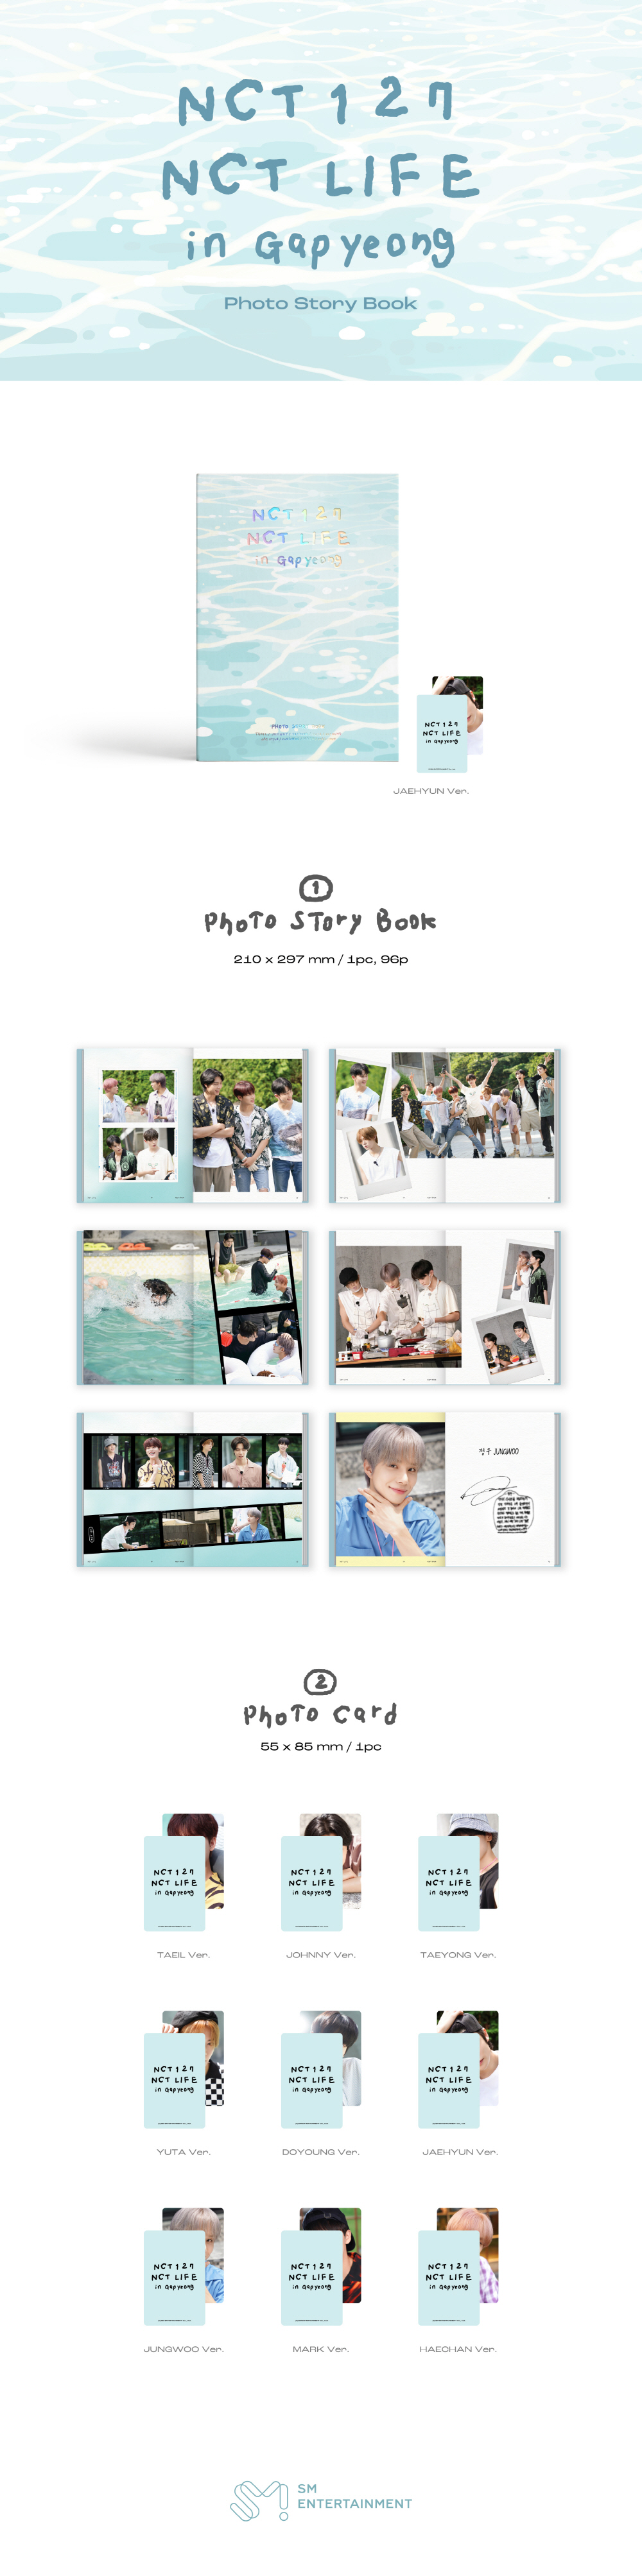 NCT 127 [NCT LIFE in Gapyeong] PHOTO STORY BOOK (TAEIL) nct127 photobook nct127goods NCTLIFE PHOTOSTORYBOOK